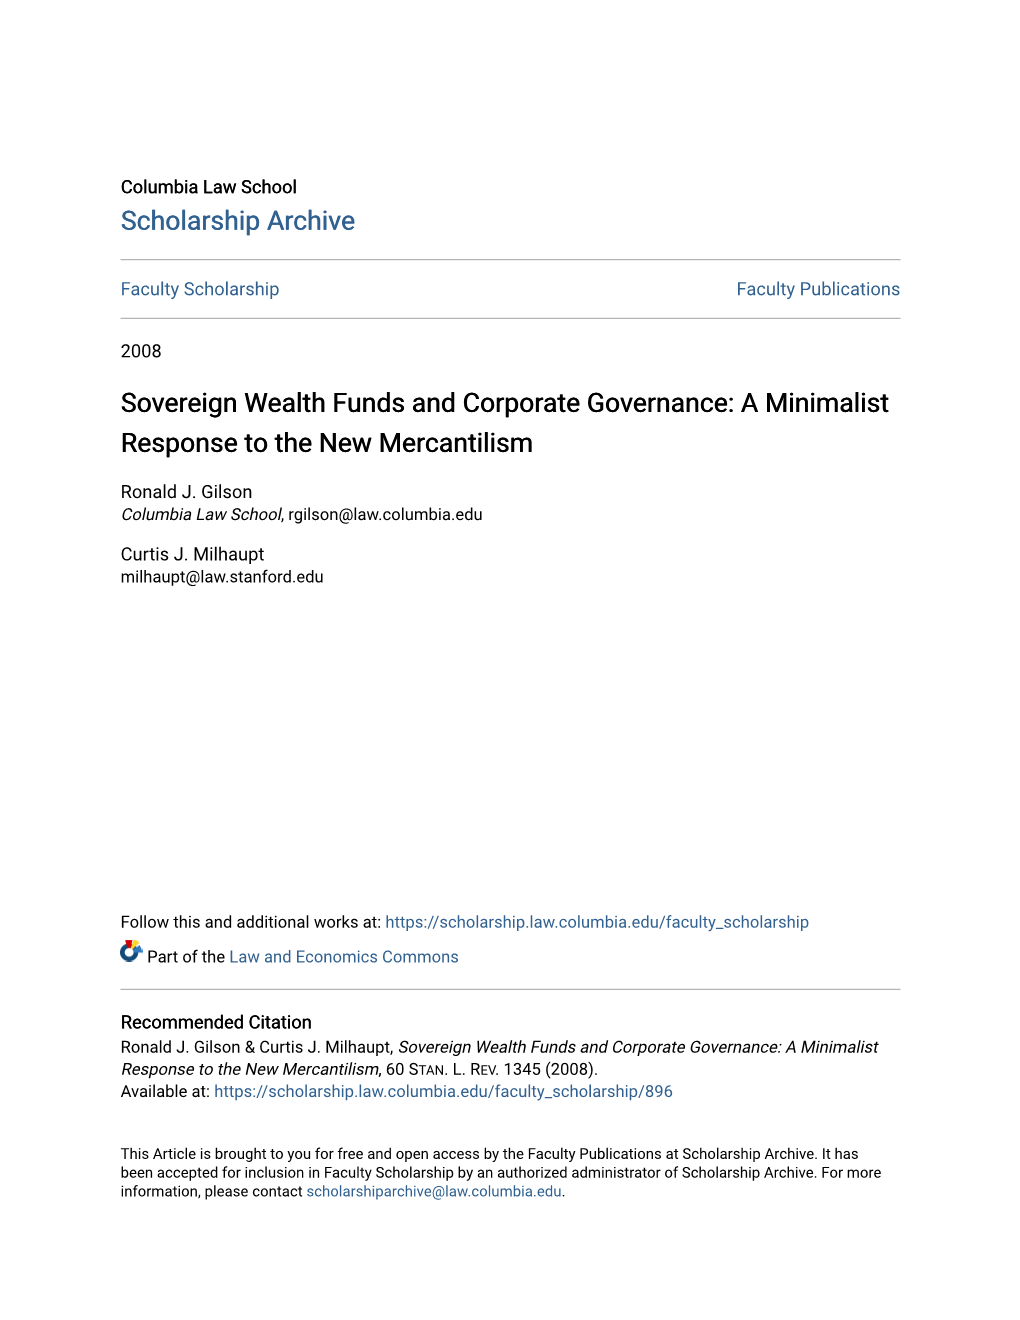 Sovereign Wealth Funds and Corporate Governance: a Minimalist Response to the New Mercantilism